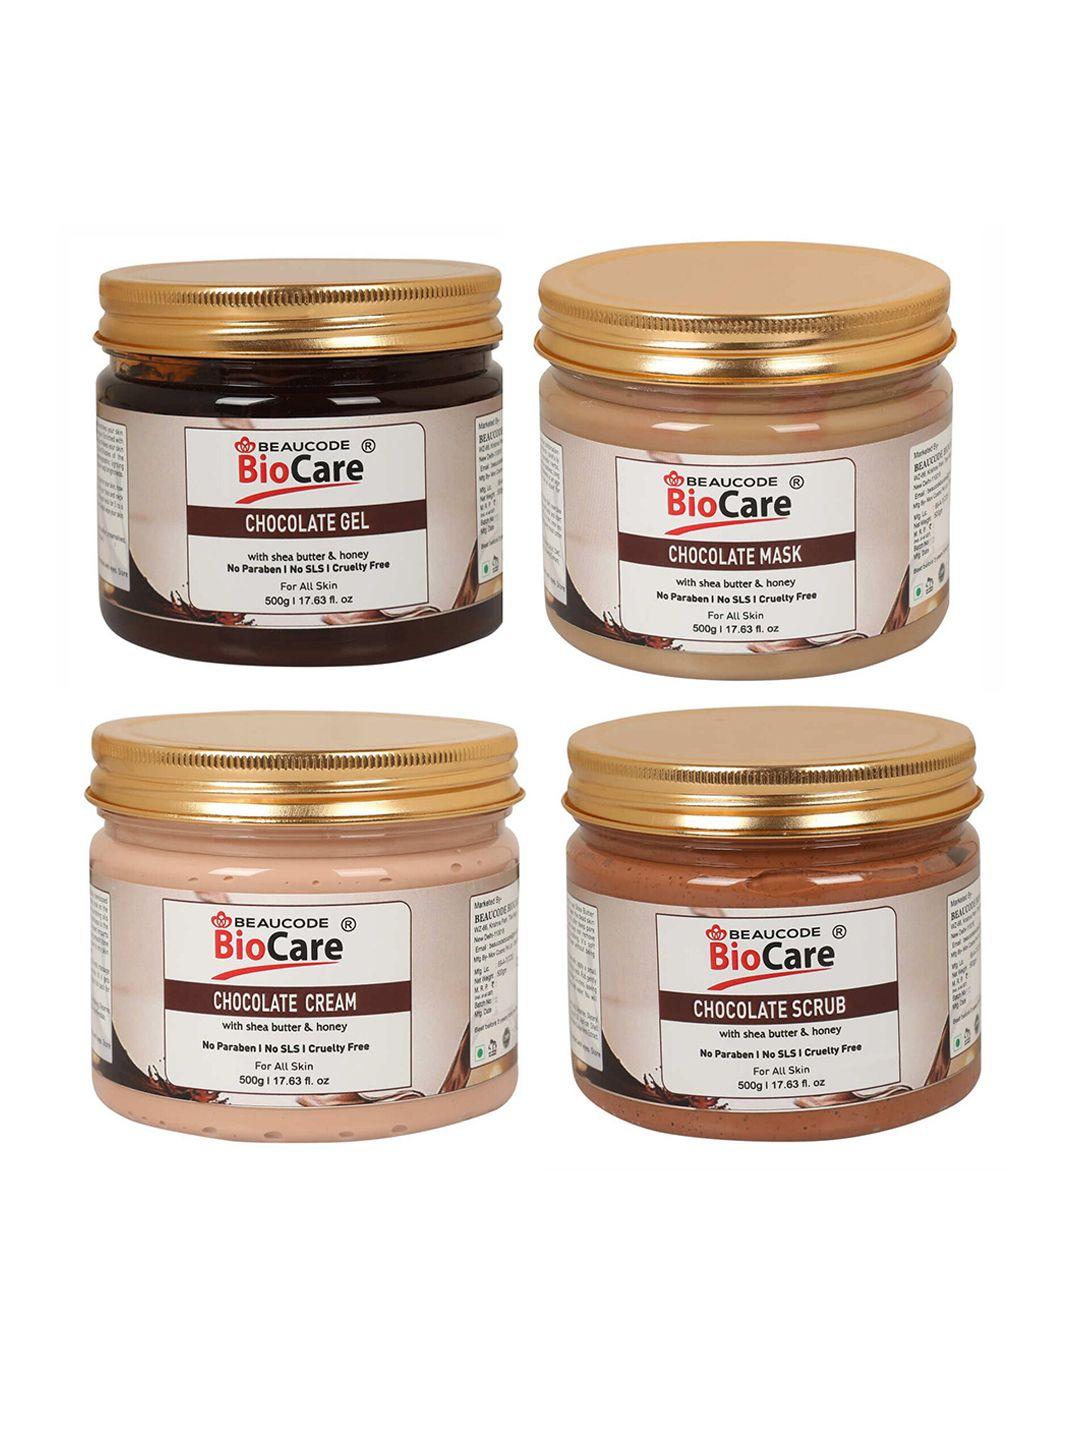 beaucode-biocare-chocolate-facial-kit-with-shea-butter-&-honey--500g-each